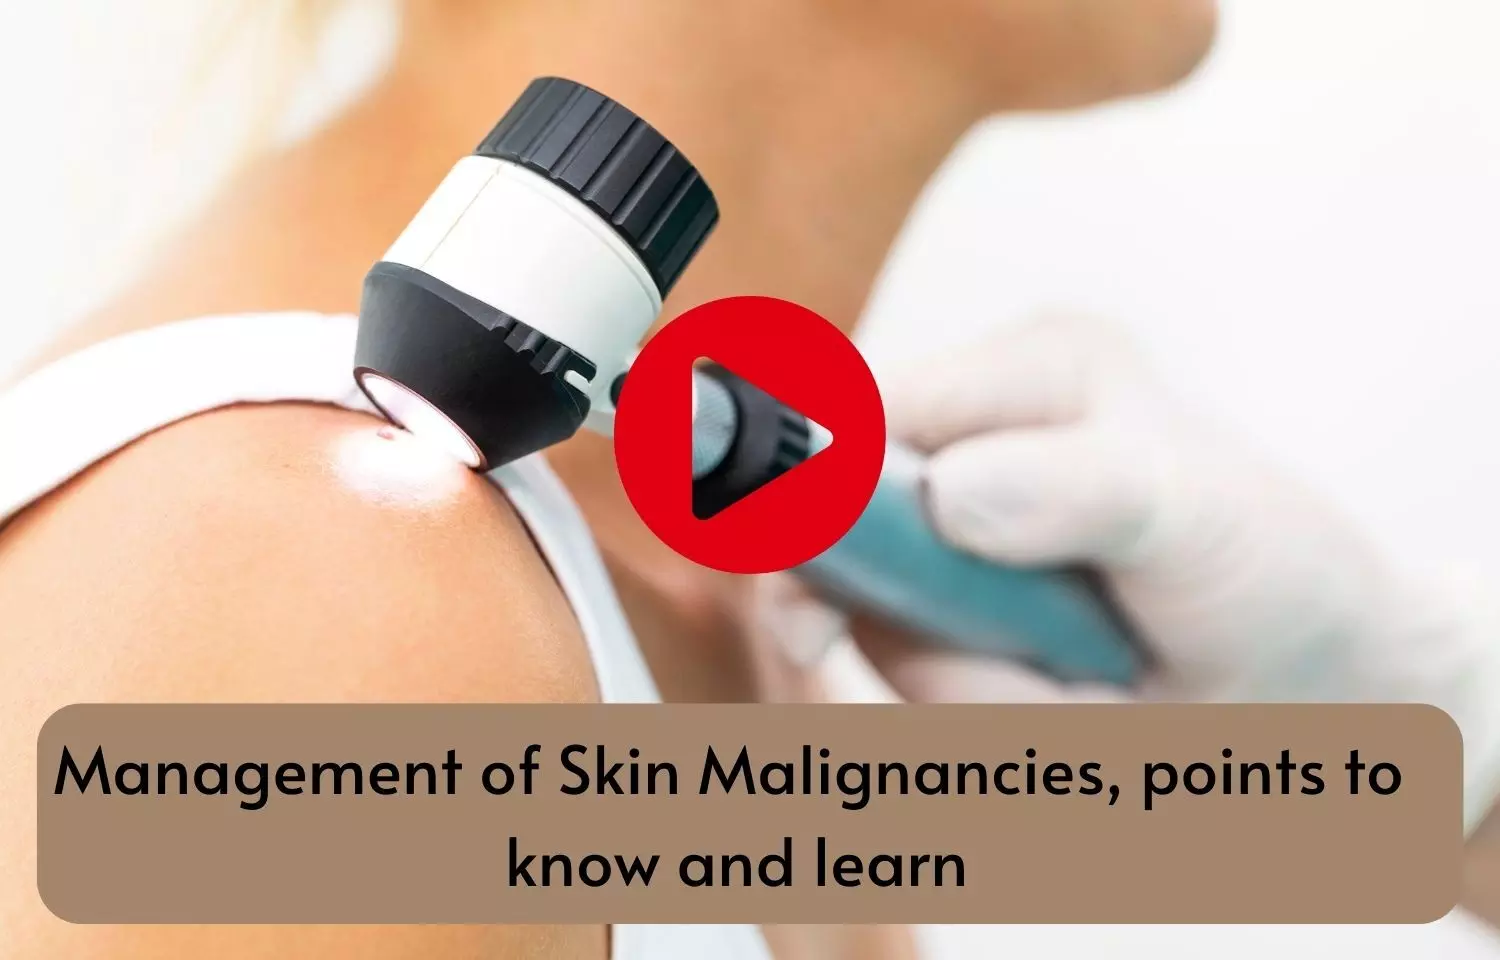 Management of Skin Malignancies, points to know and learn